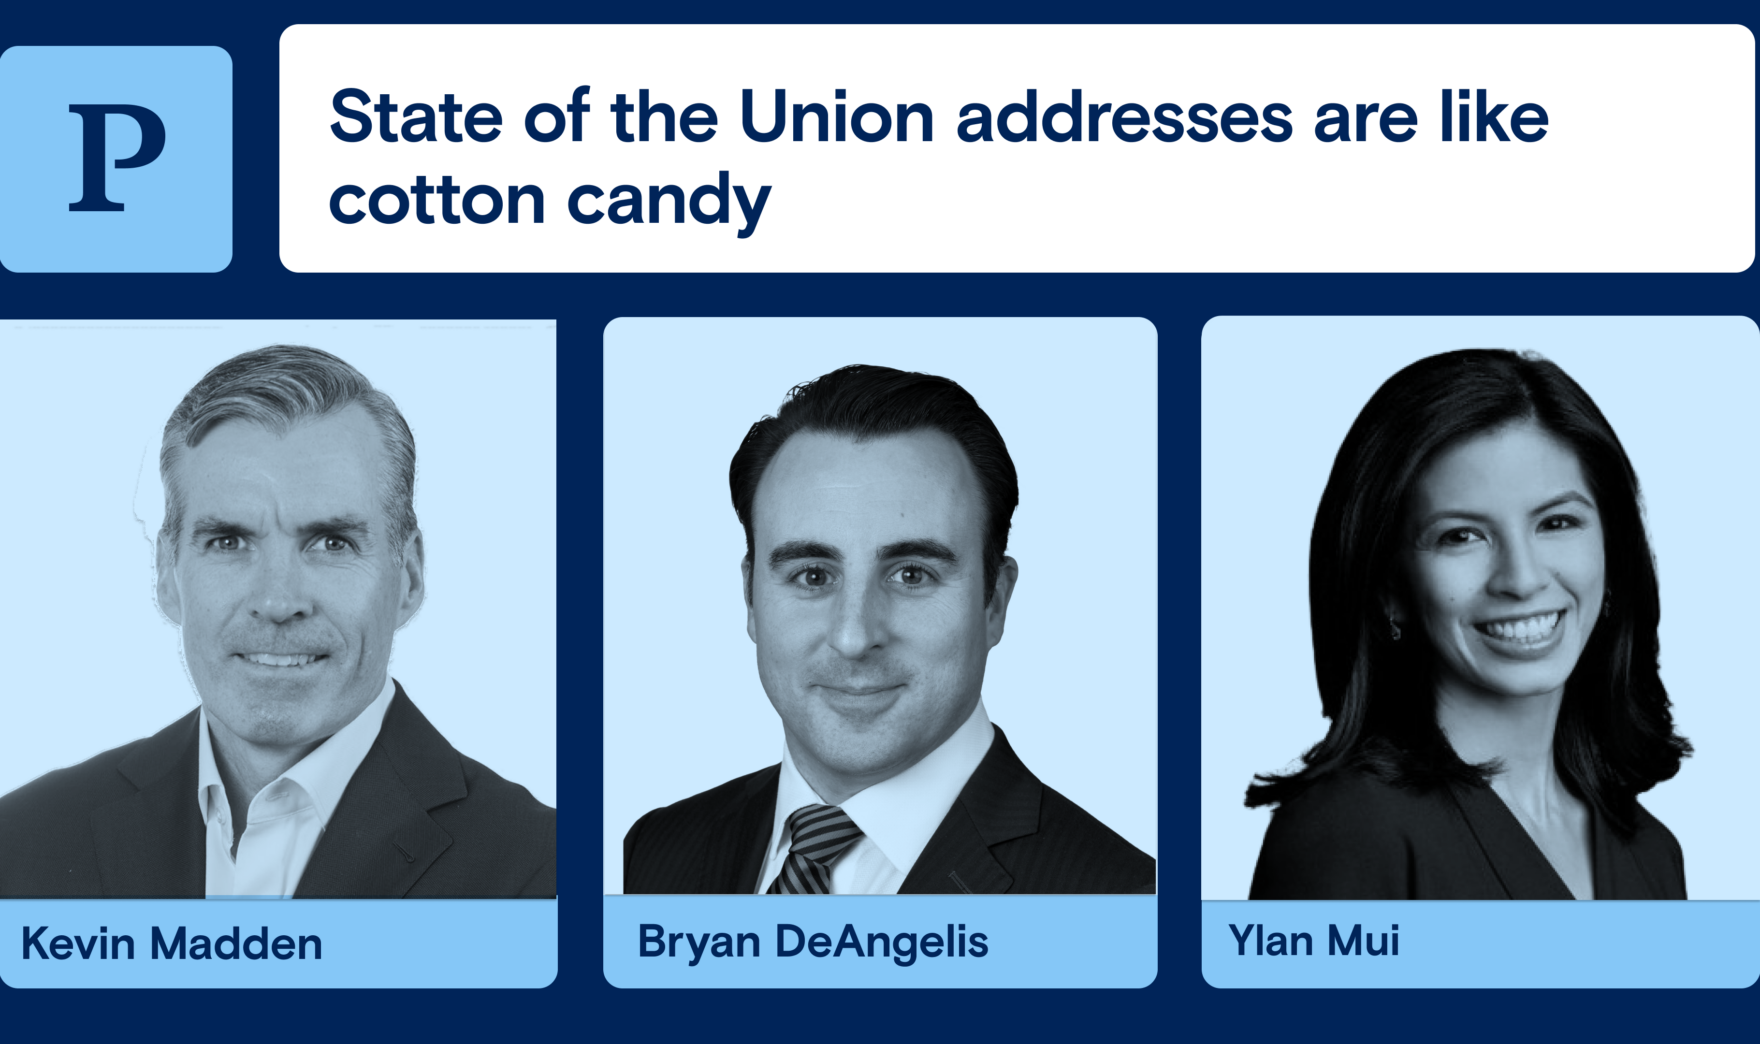 State of the Union addresses are like cotton candy